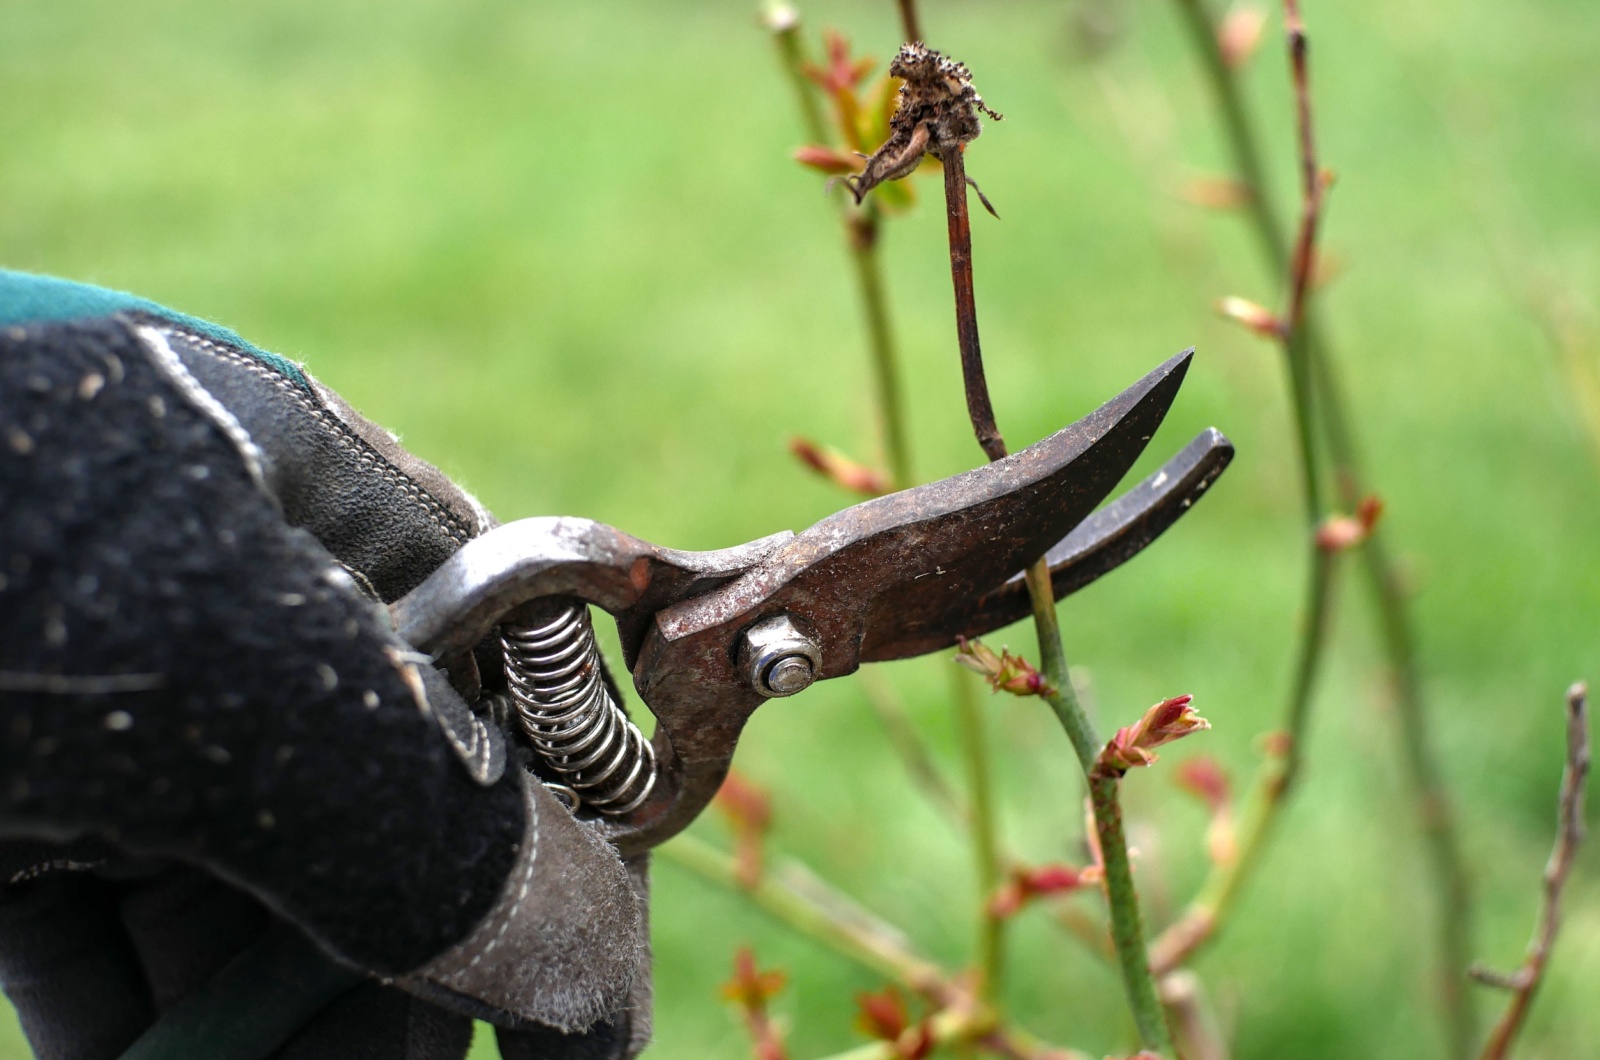 A gloved hand holds pruning shears and cuts a branch